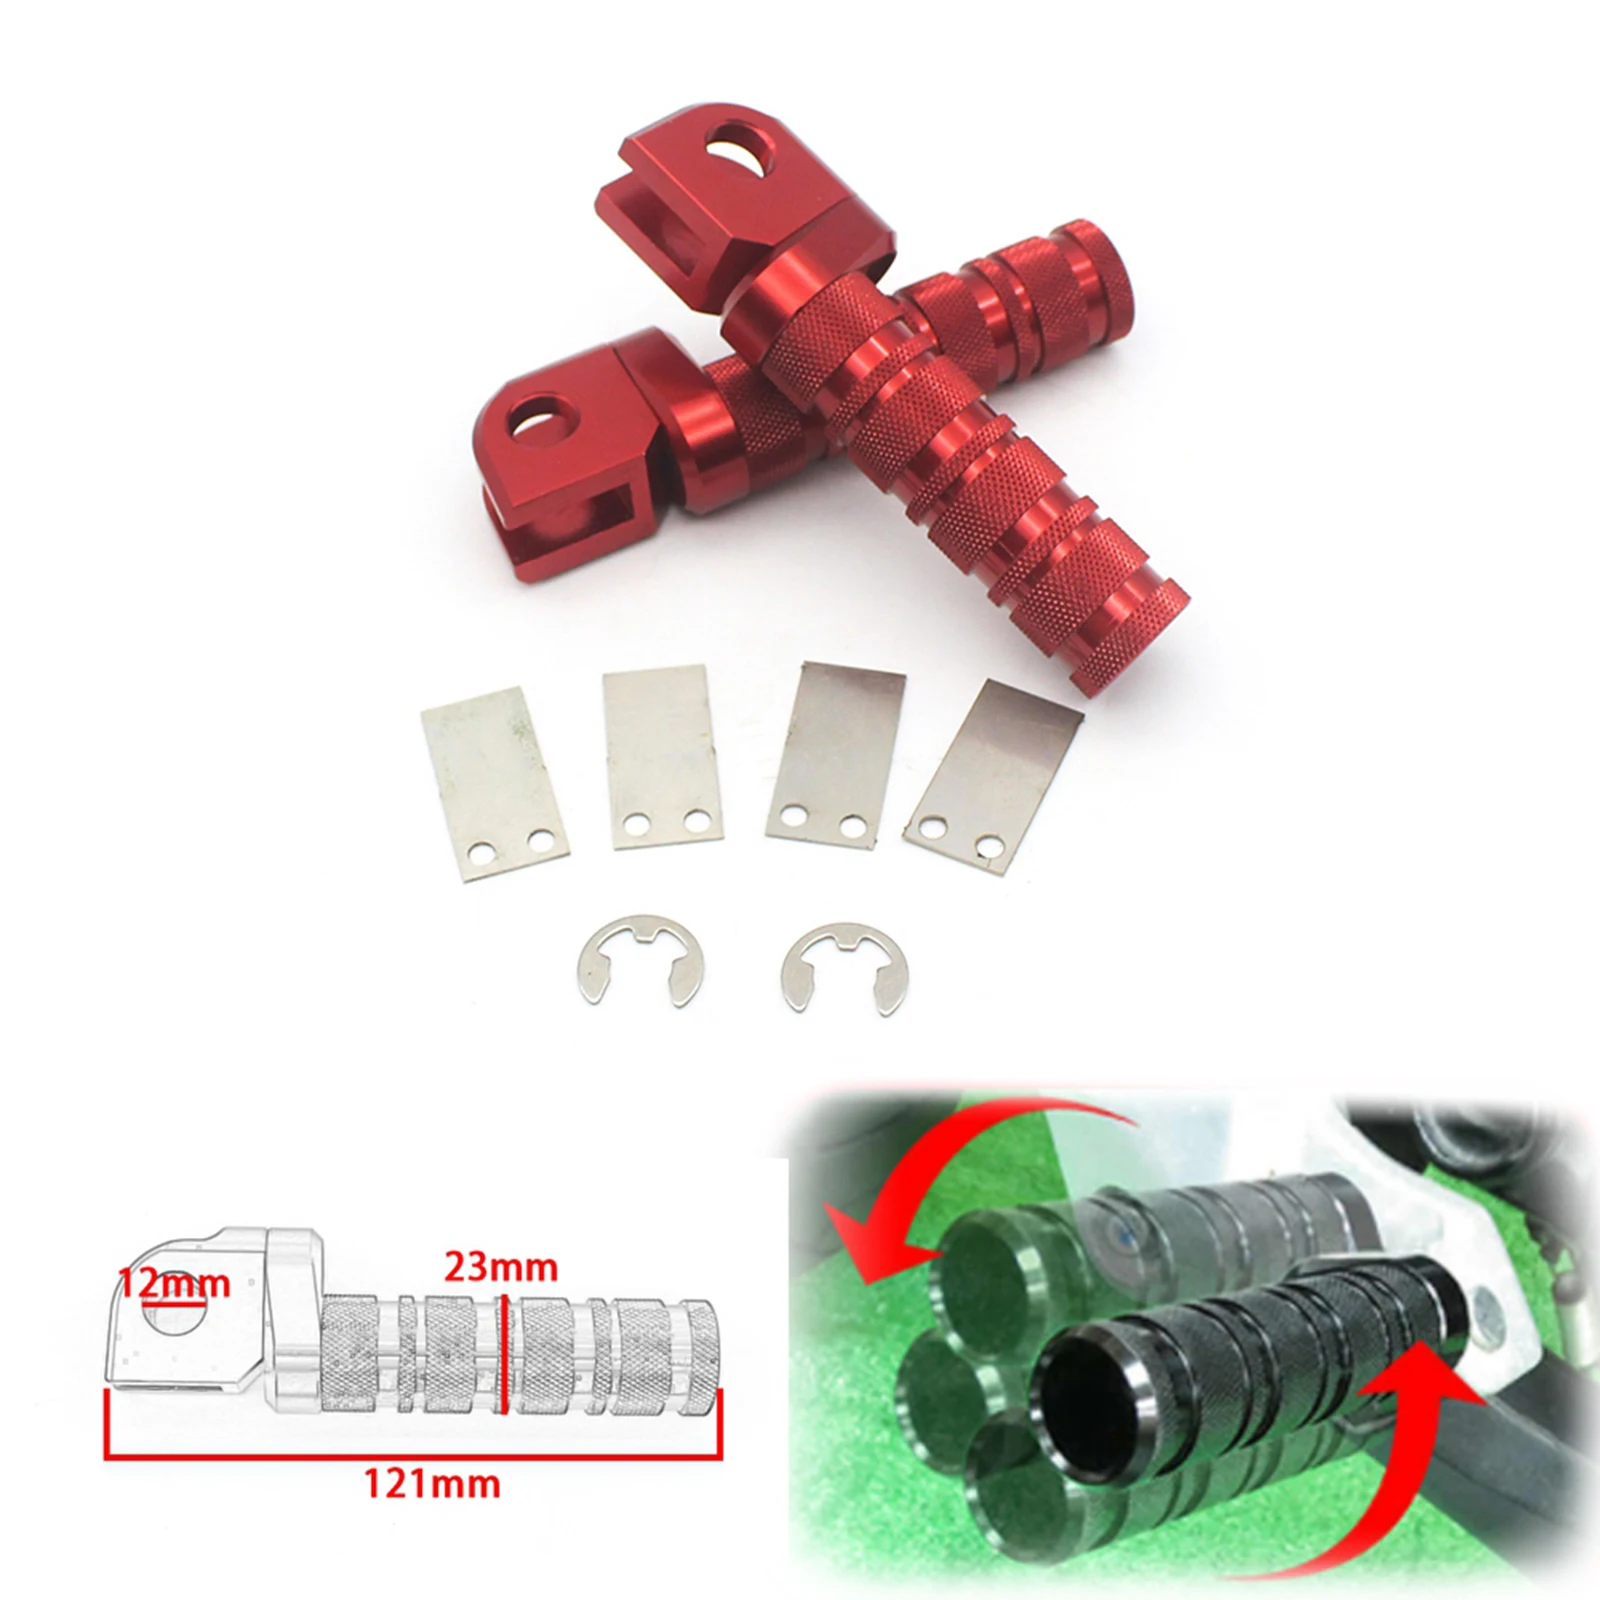 CNC Motorcycle Front Foot Pegs Pedals Pads Footrests w/Mount for Kawasaki Z800 Z650 Z900 Z1000 Z750 ZX-10R ZX-6R ER-6N ER-6F